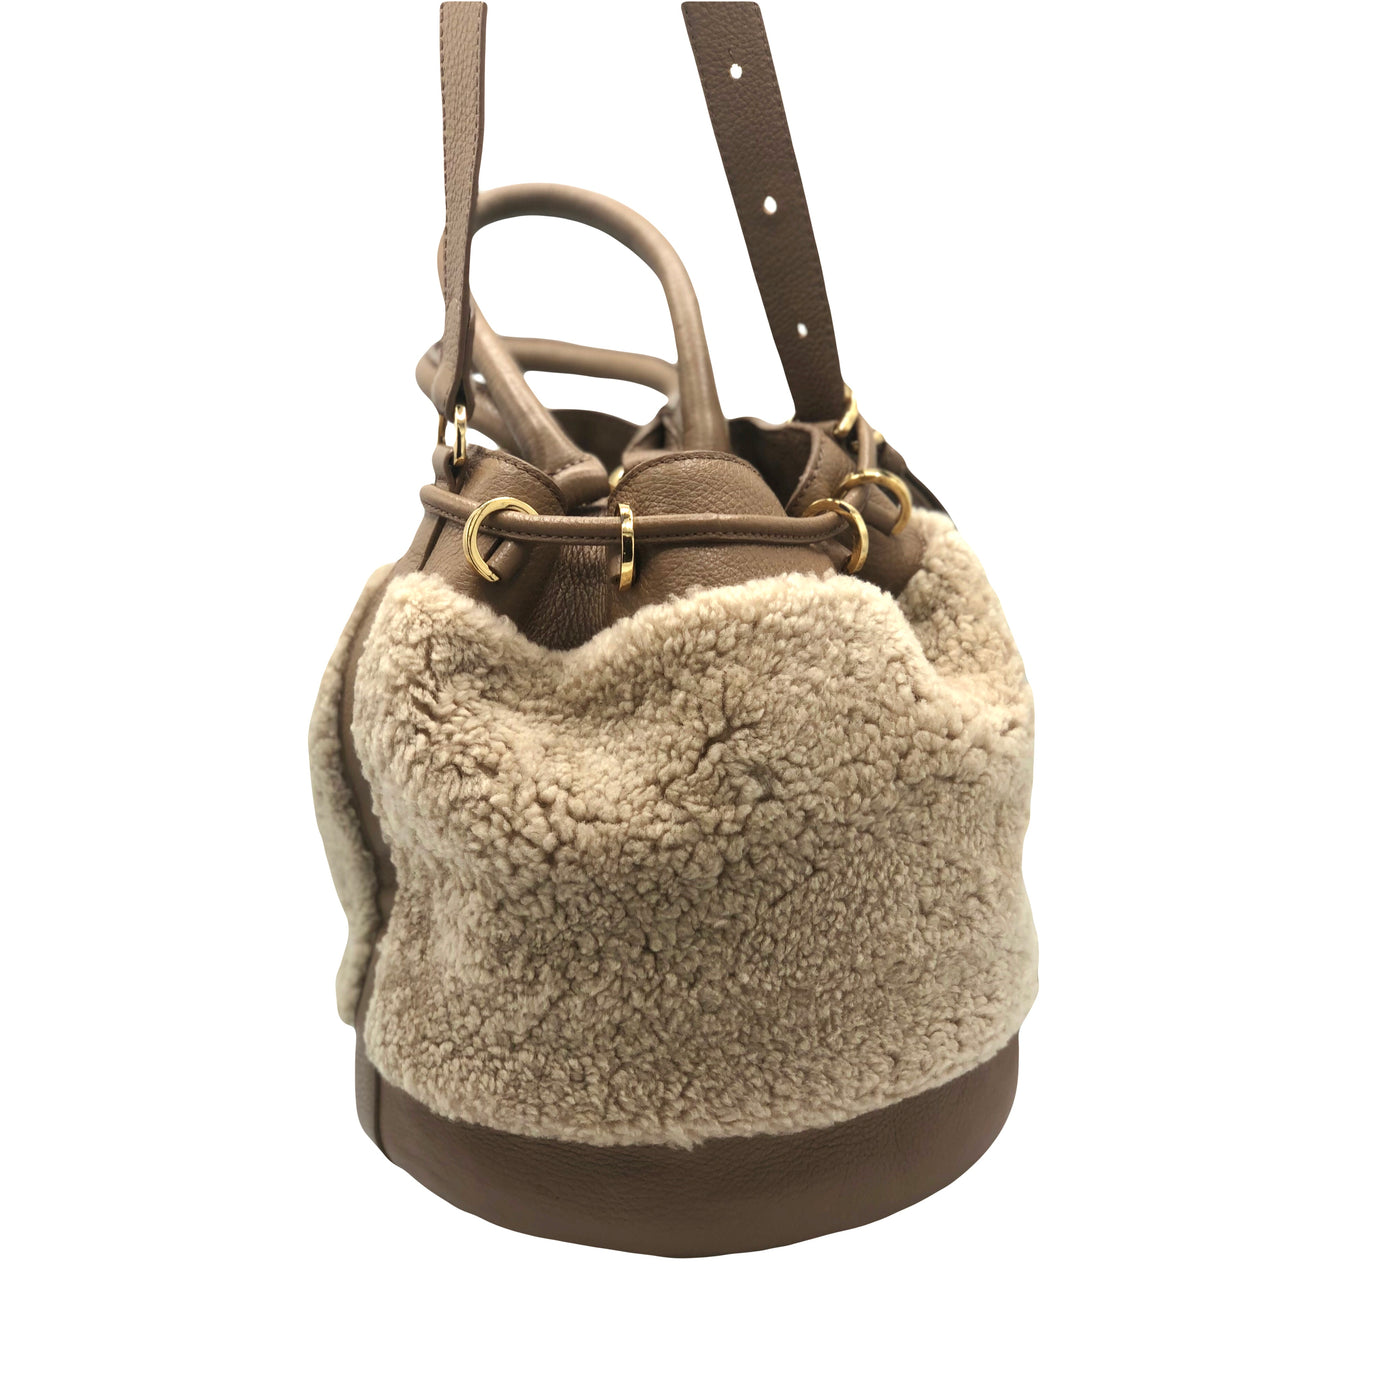 SEE  BY CHLOE shearling taupe leather handbag with tassel and long strap